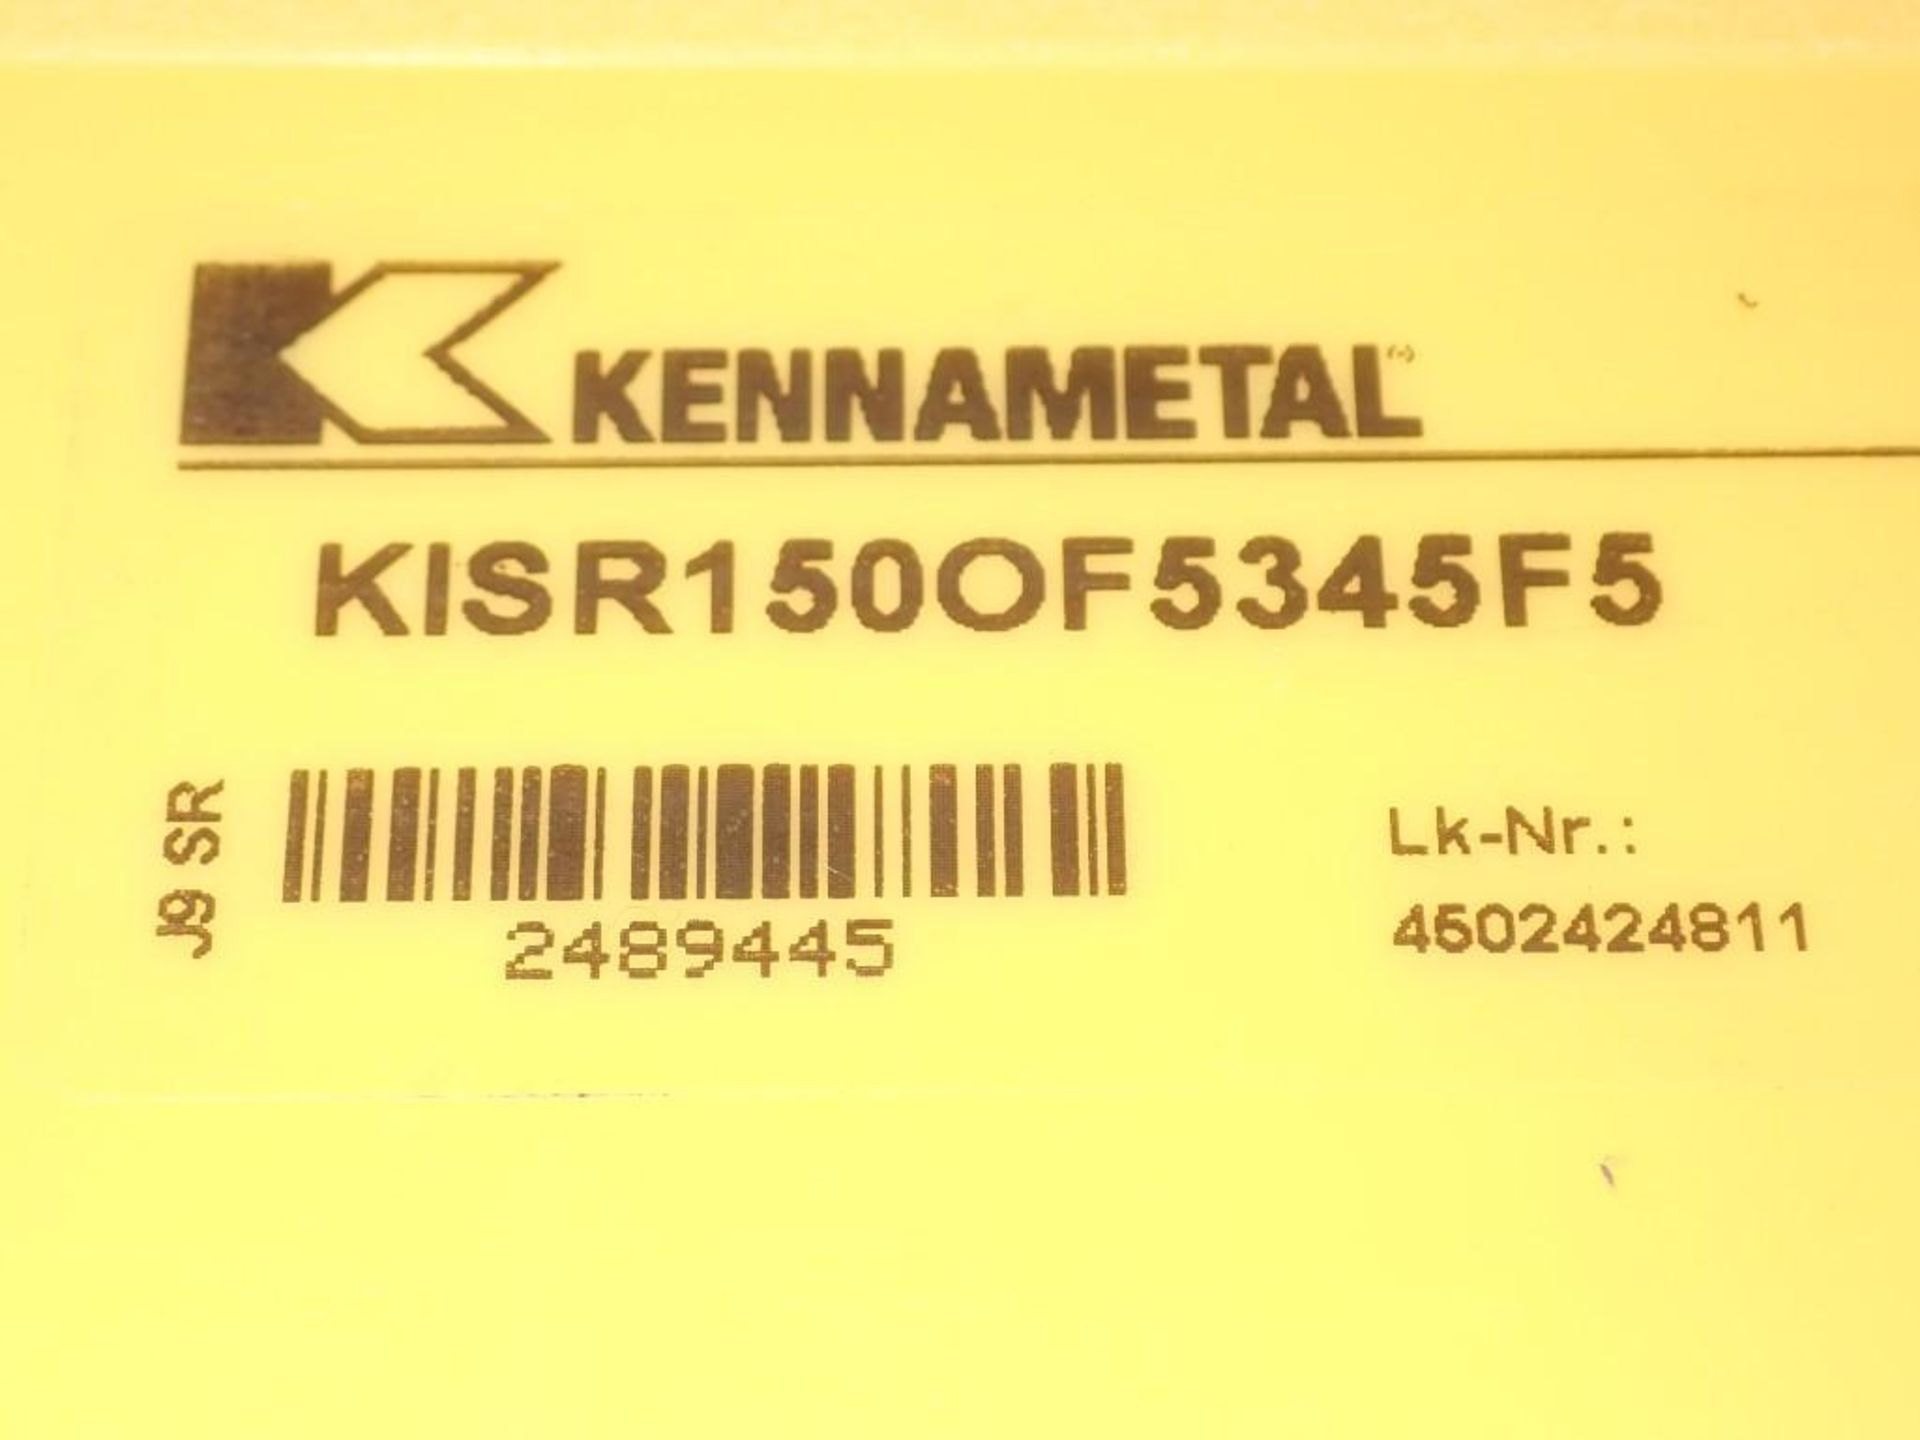 Lot of (3) Kennametal #KISR150OF5345F5 Indexable Endmills - Image 2 of 5